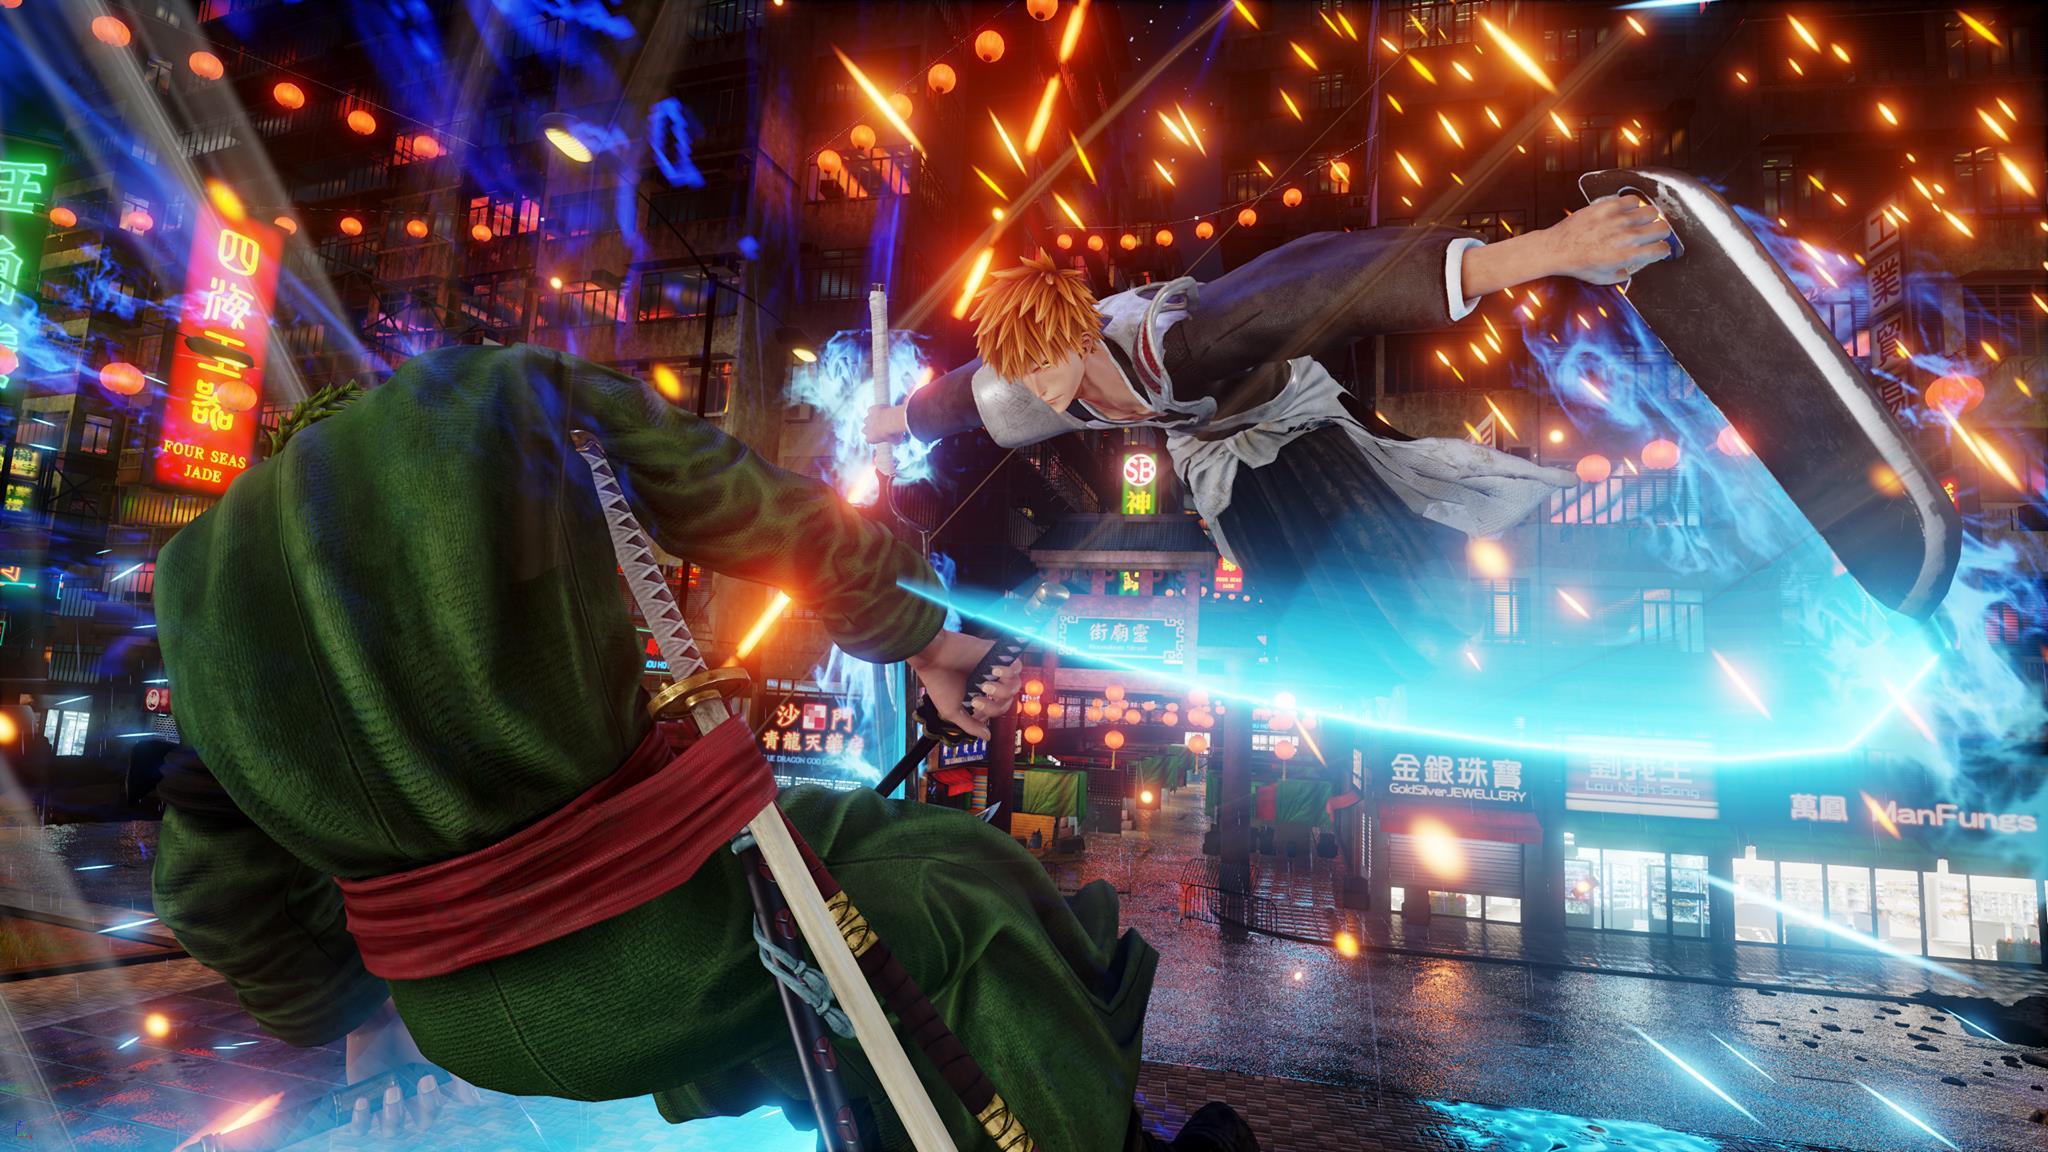 Jump Force Supercut Video Shows Several Minutes of Gameplay Footage